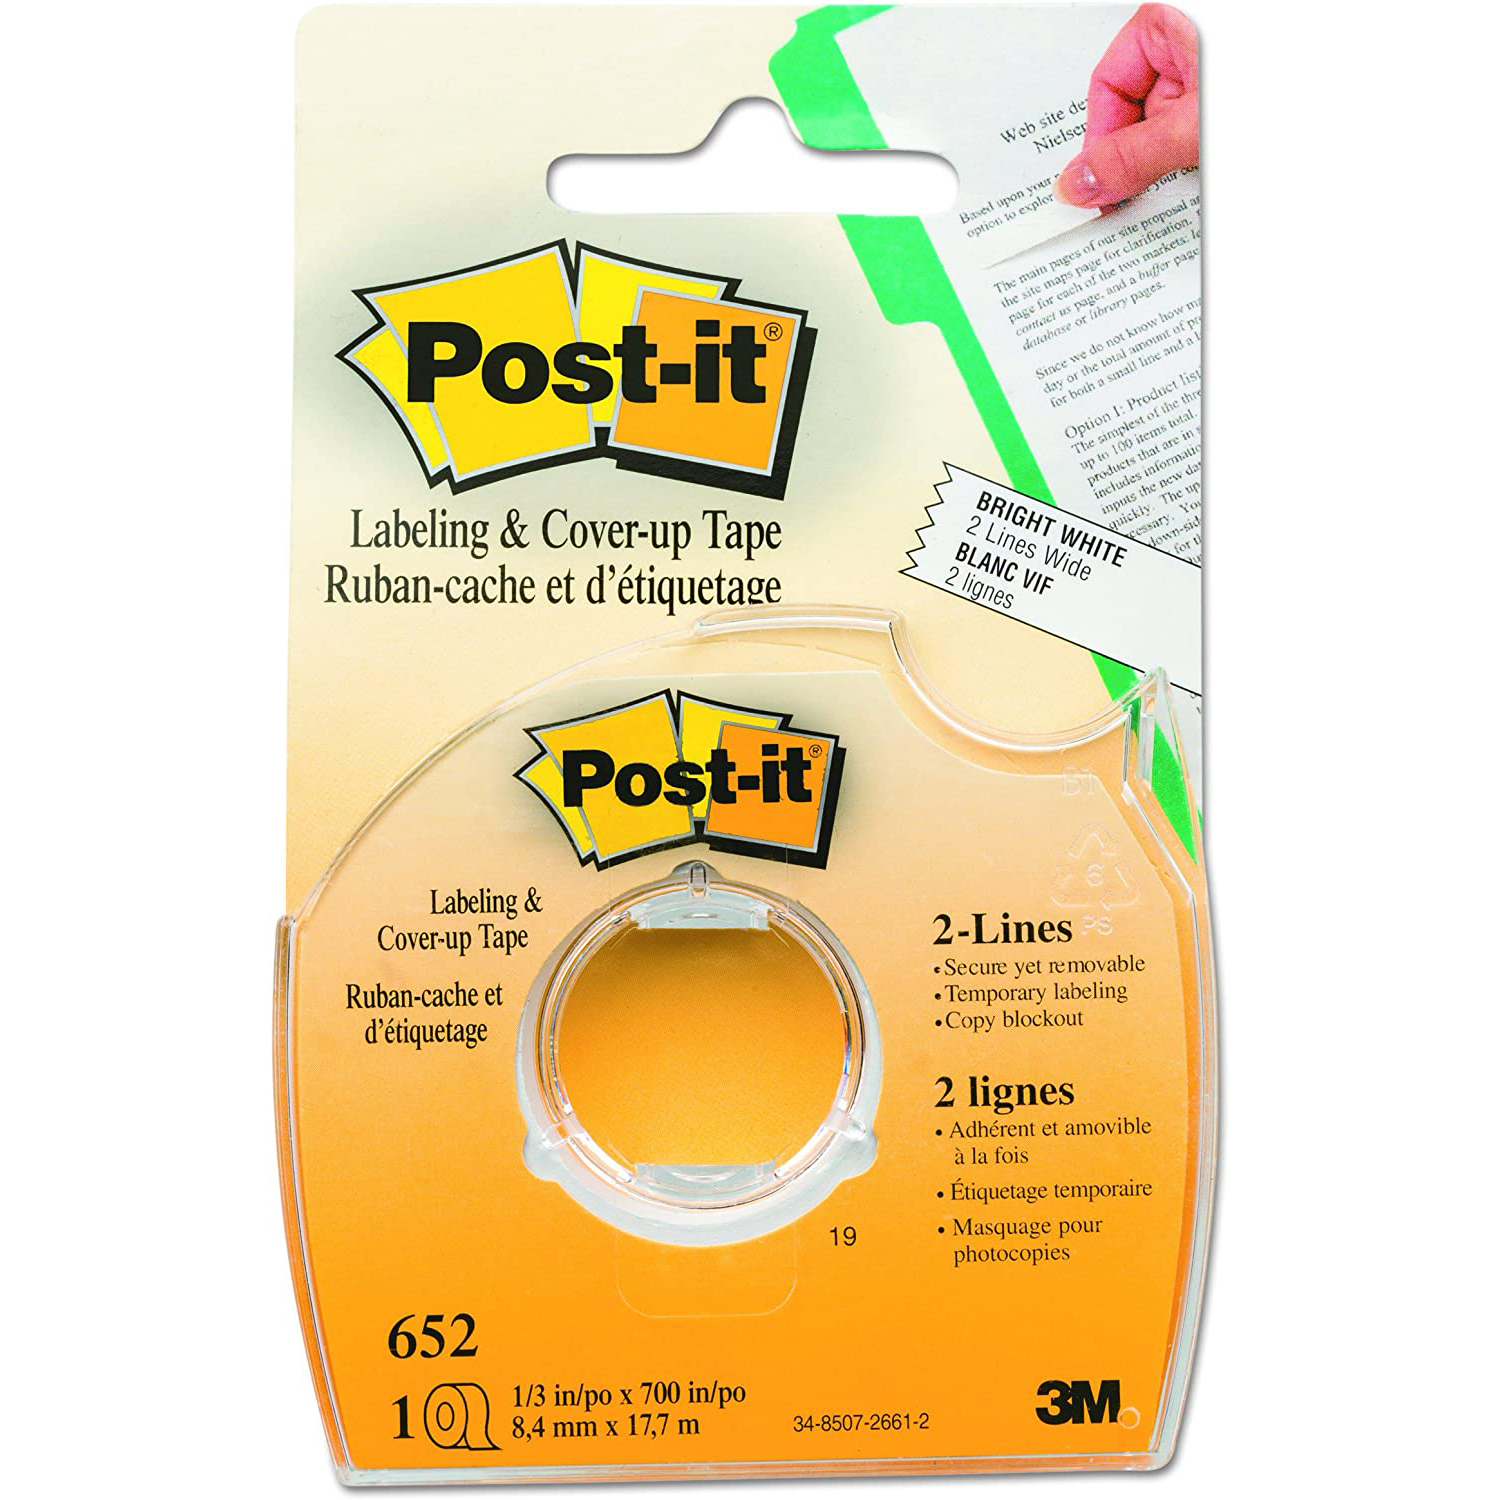 Post-It Labeling and Cover-Up Tape